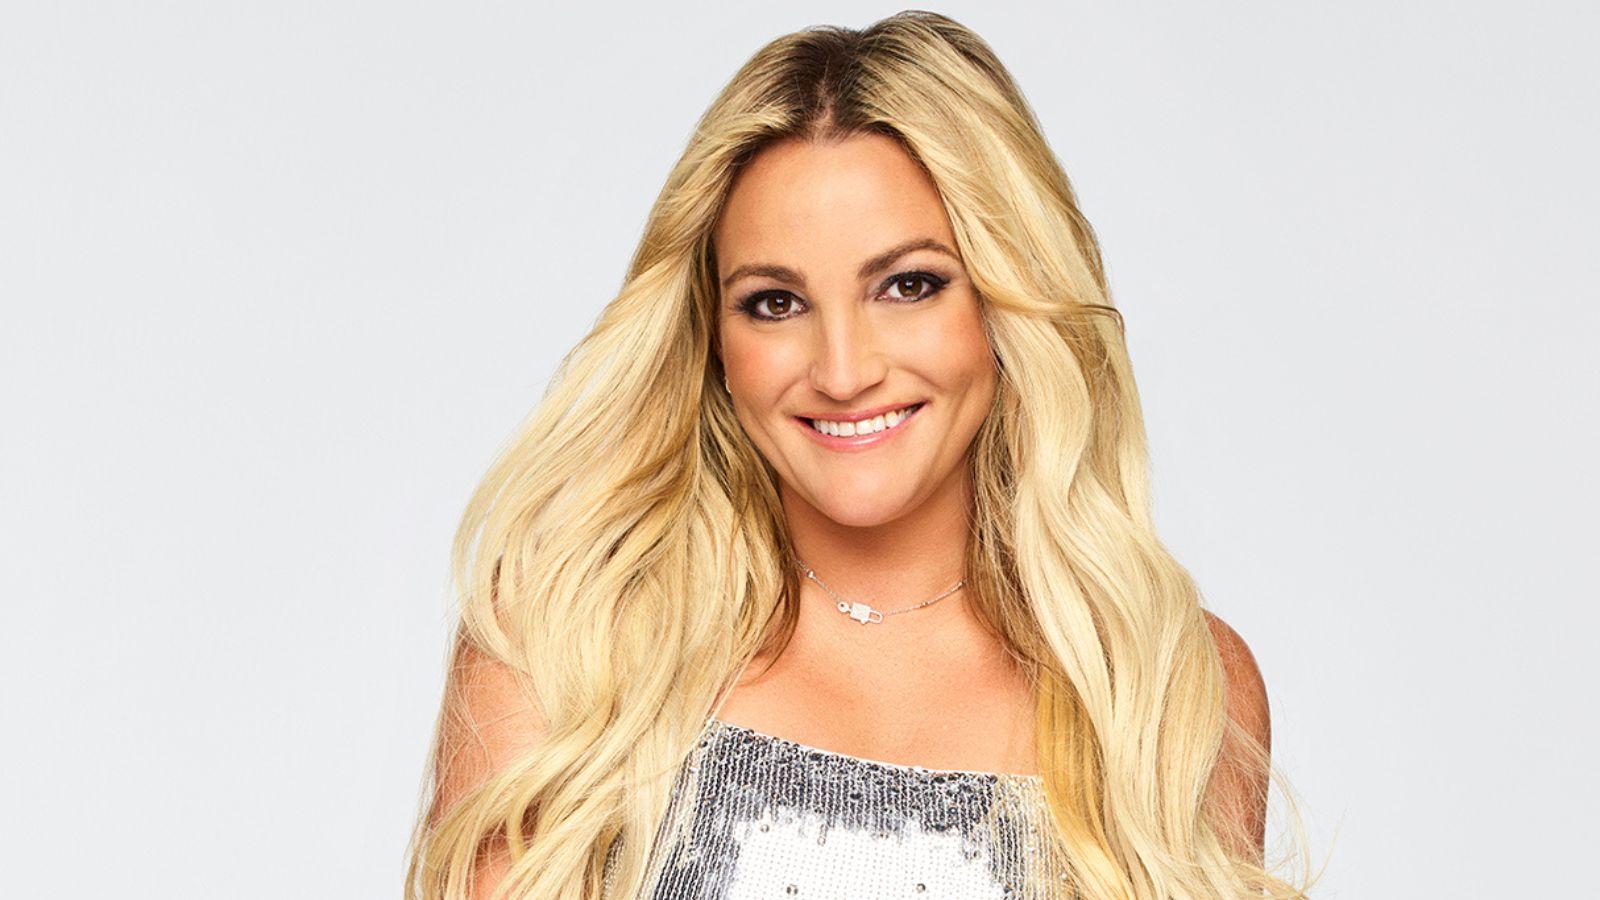 Jaime Lynn Spears from Dancing With The Stars